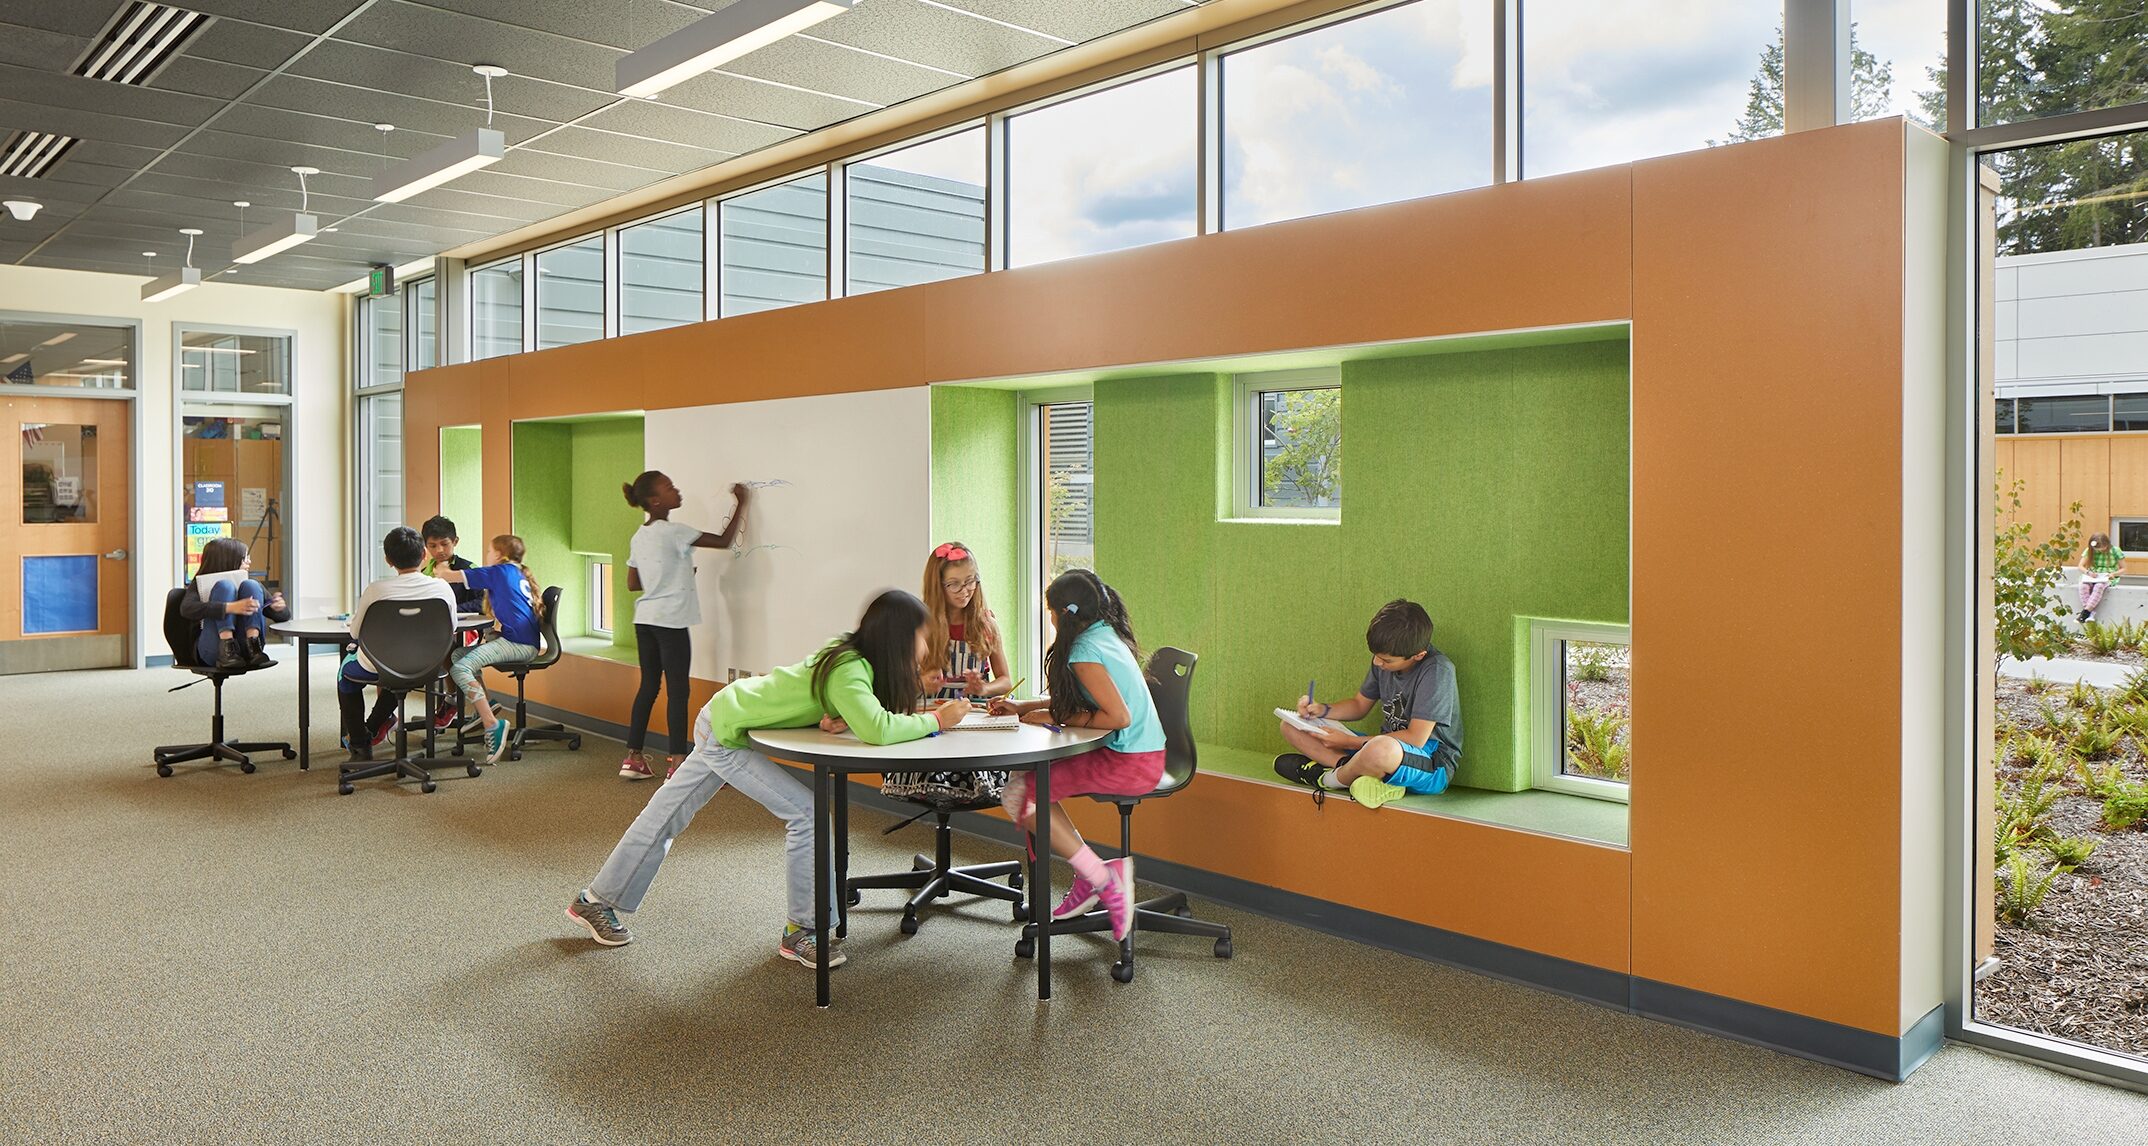 At Bennett Elementary School, open collaborative areas are strategically placed at the center of each classroom cluster to regulate access to highly-populated student spaces. A controlled entry system adds an additional layer of security to the building. – NAC Architecture